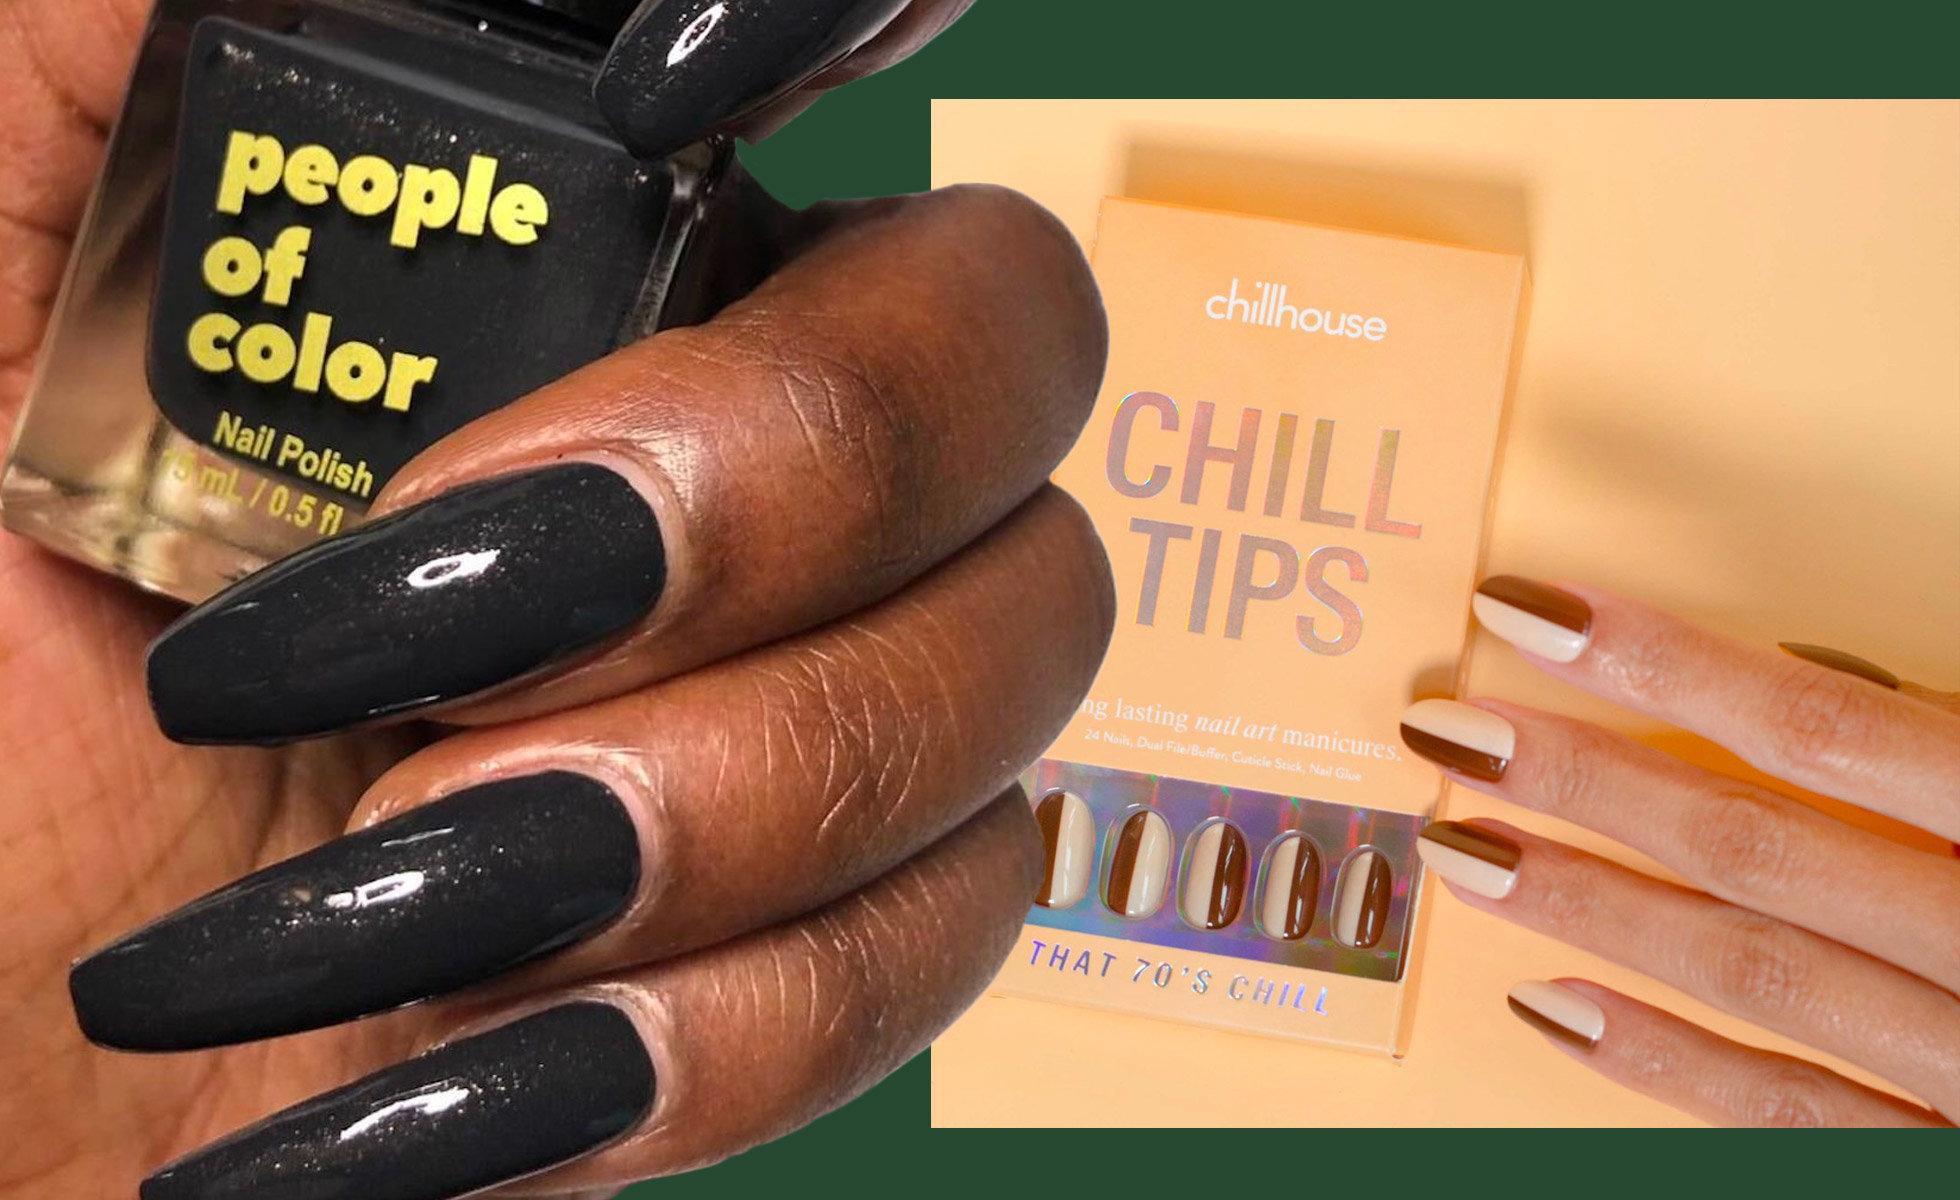 Photo: People of Color Beauty Nail Polish in Rani Chennamma (L) and Chillhouse The Signature Chill Tips in That 70’s Chill. Images courtesy of People of Color Beauty and Chillhouse